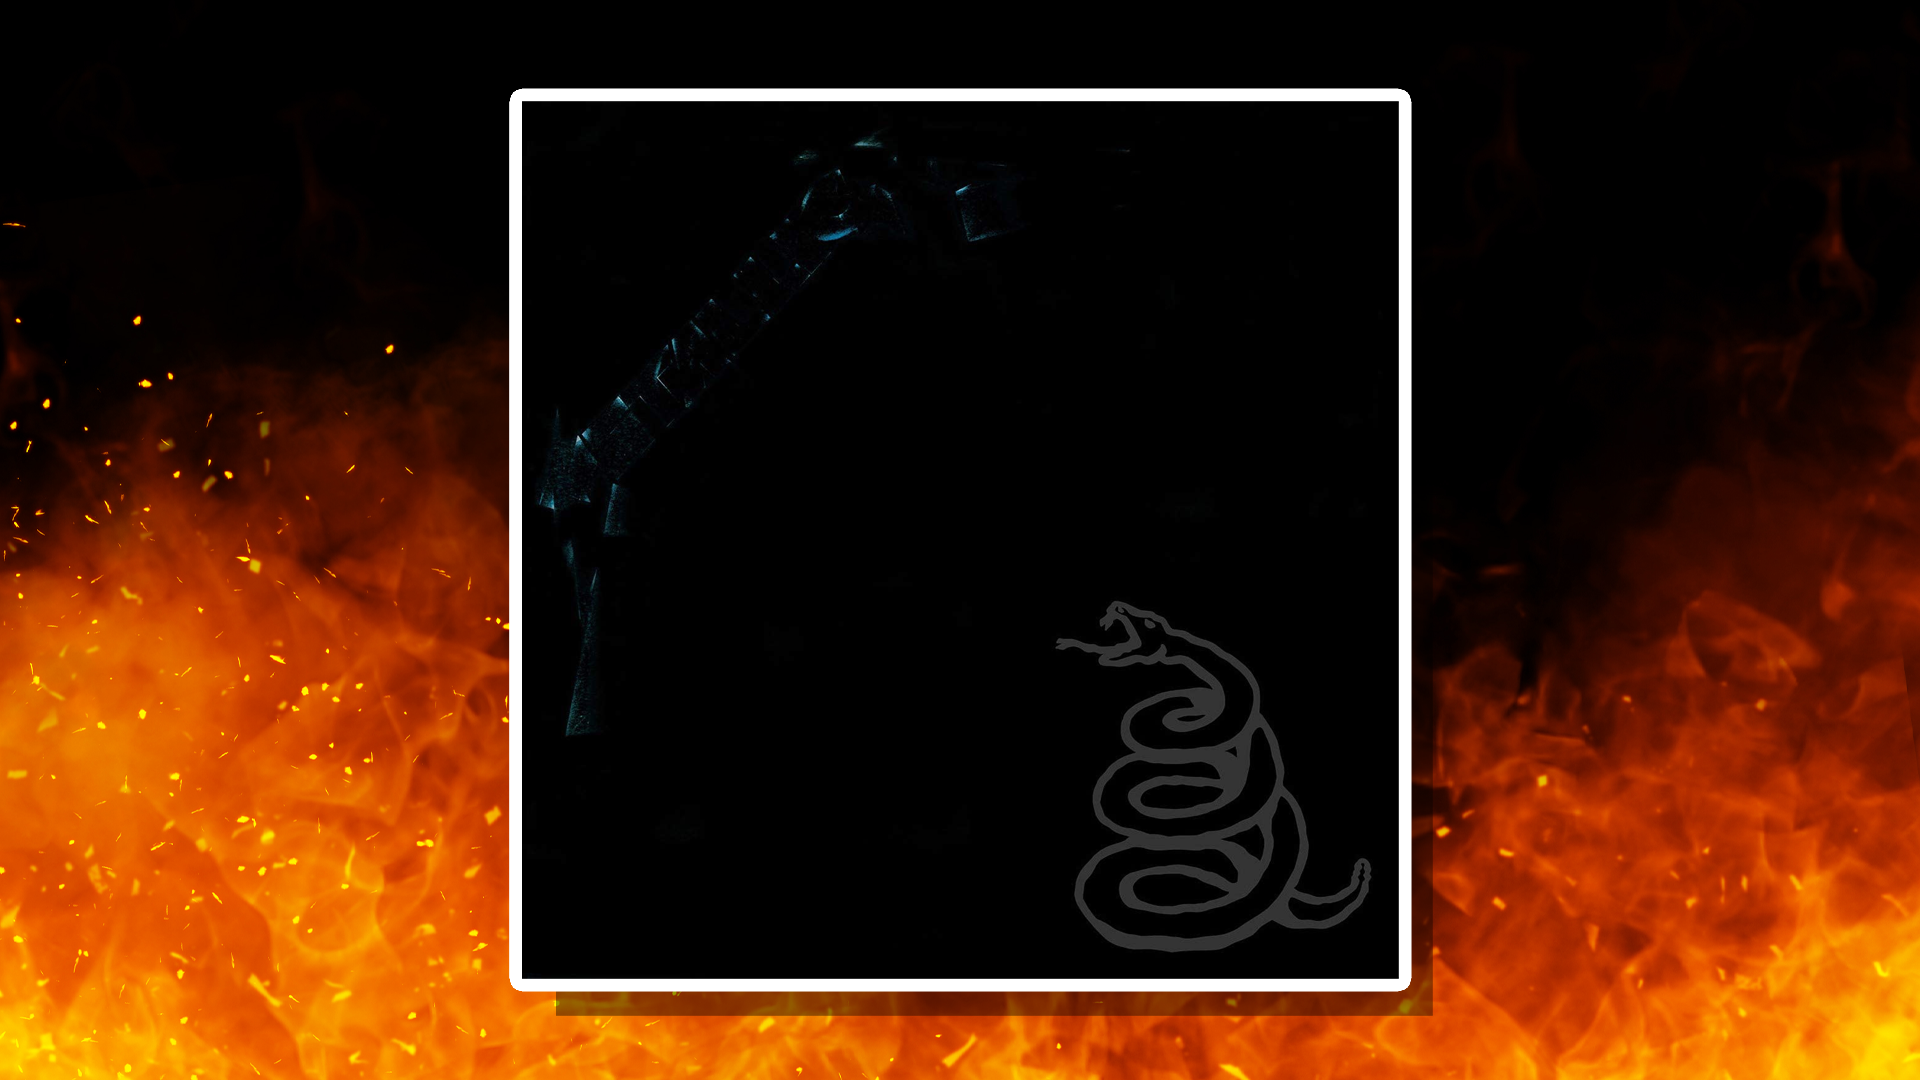 Metallica's 1991 Black Album with elements of the cover artwork revealed